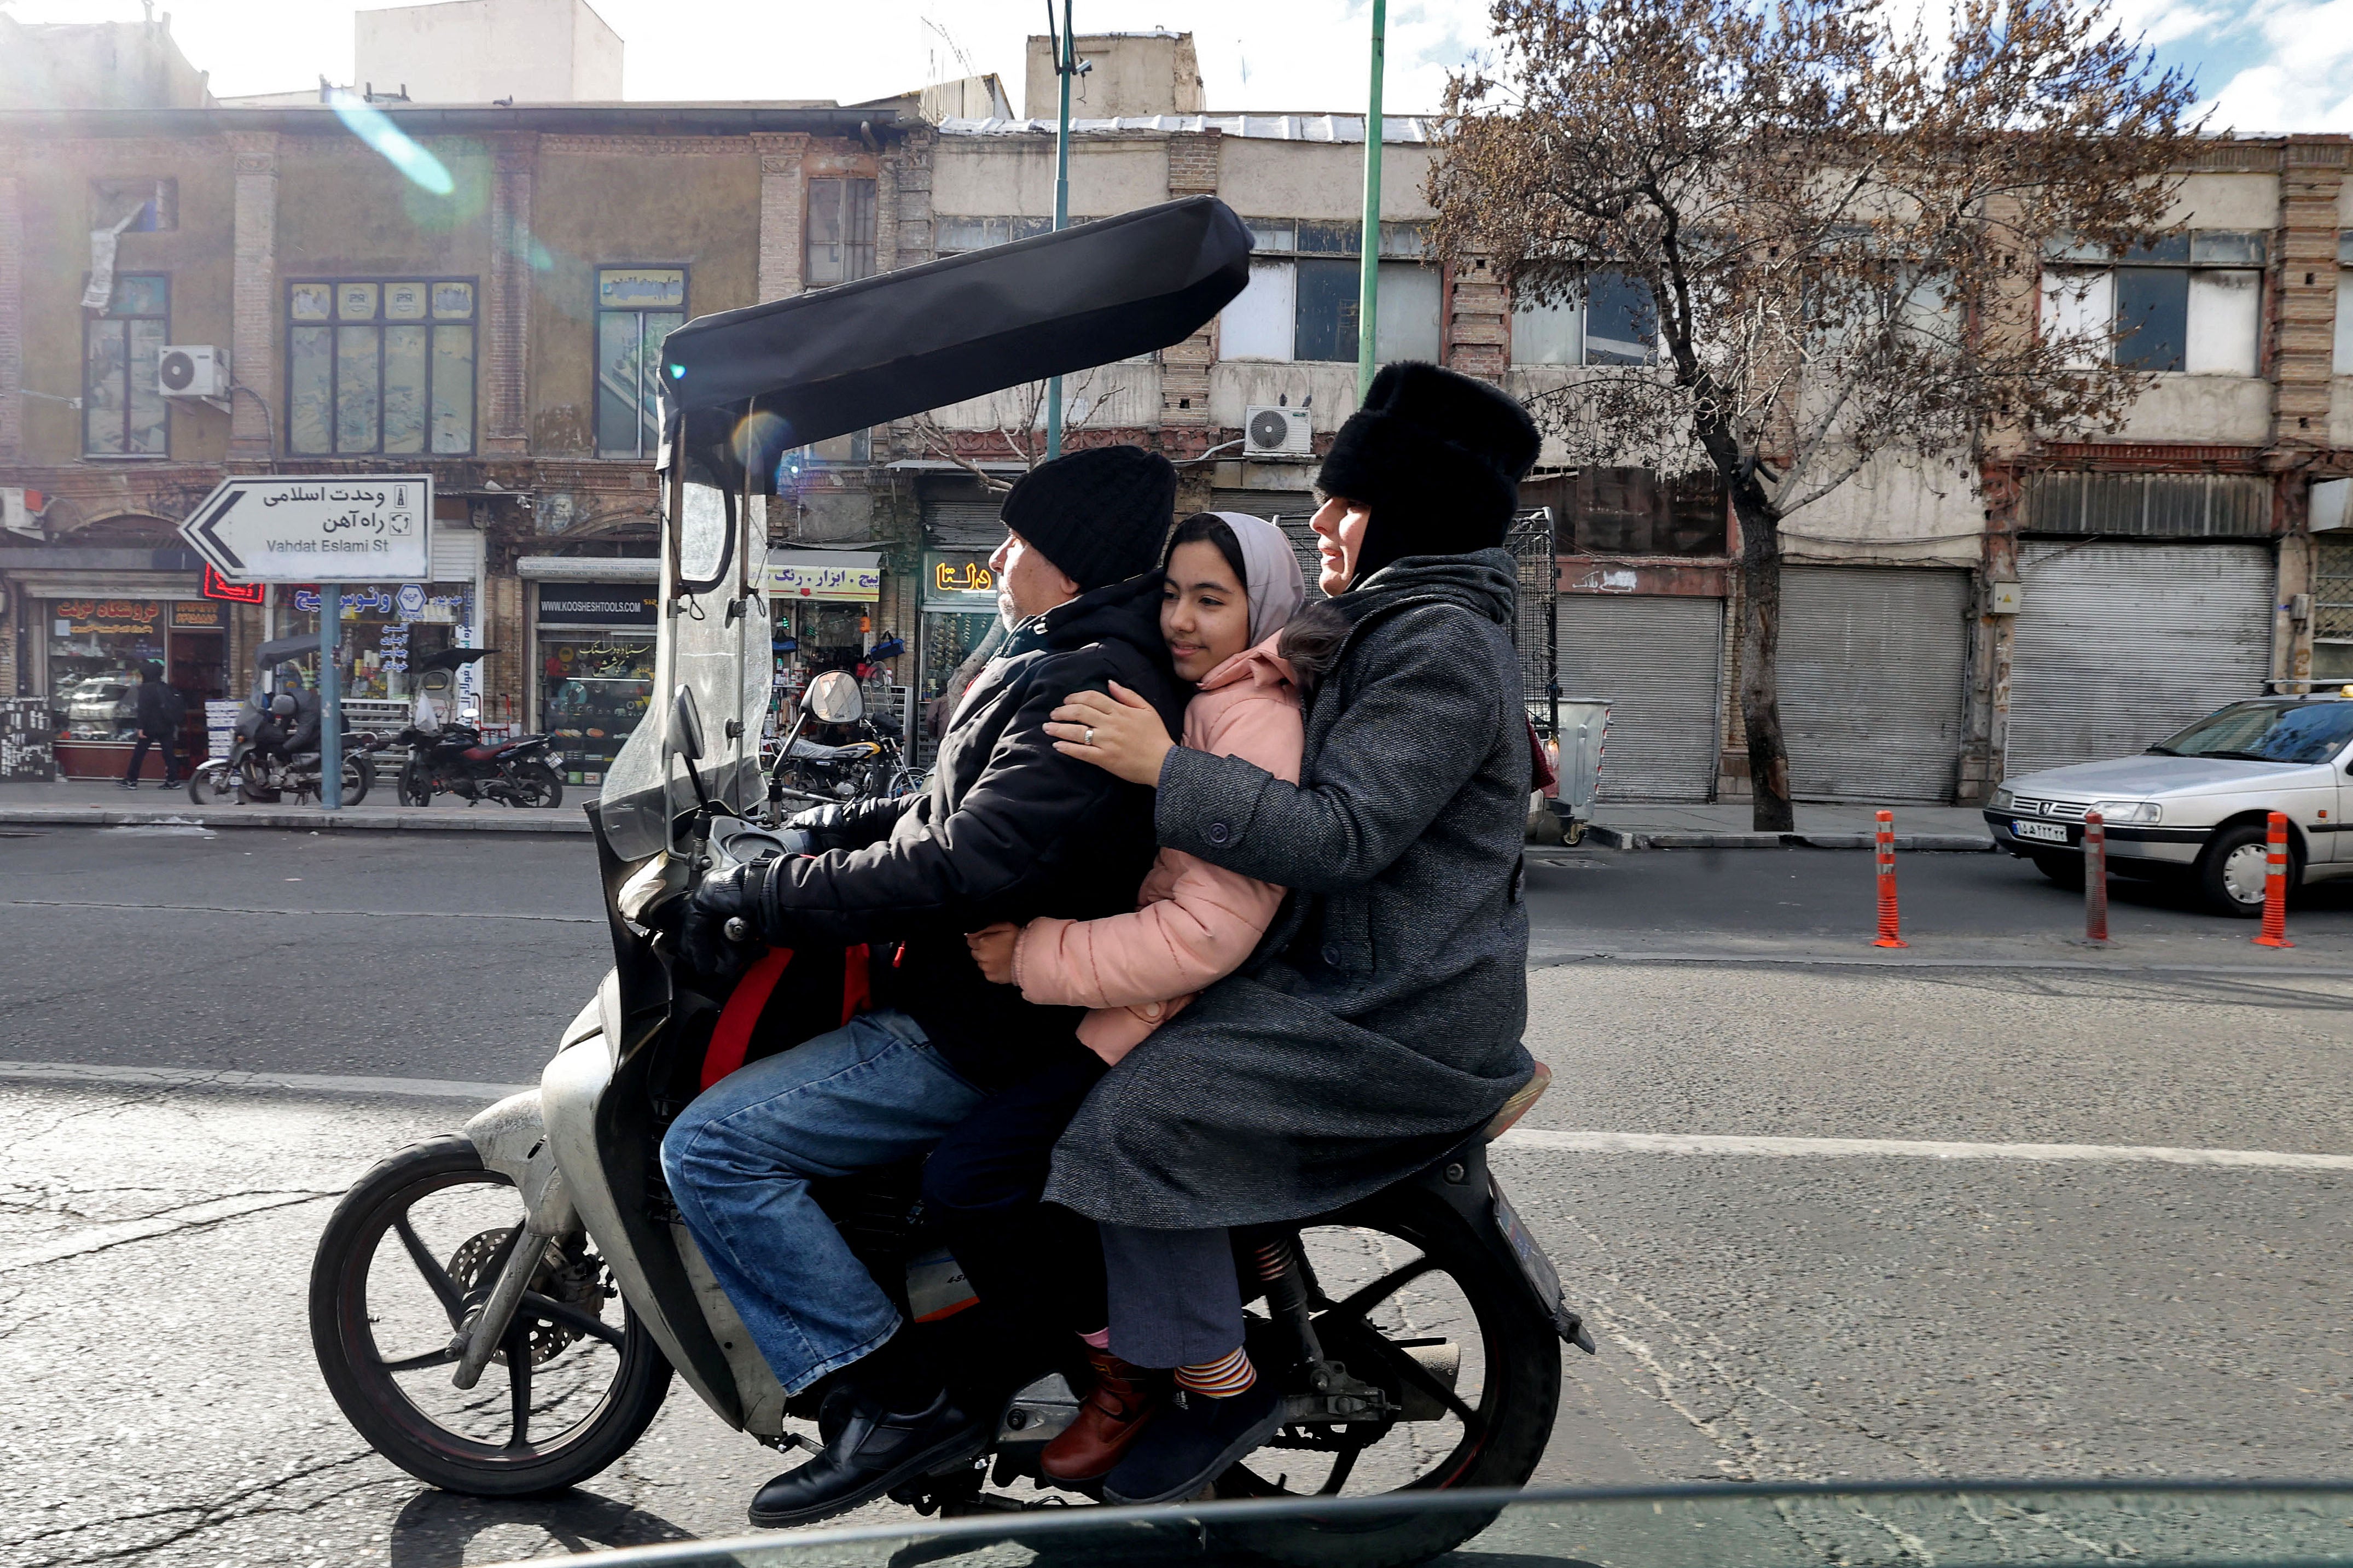 Women’s rights are profoundly restricted in Iran